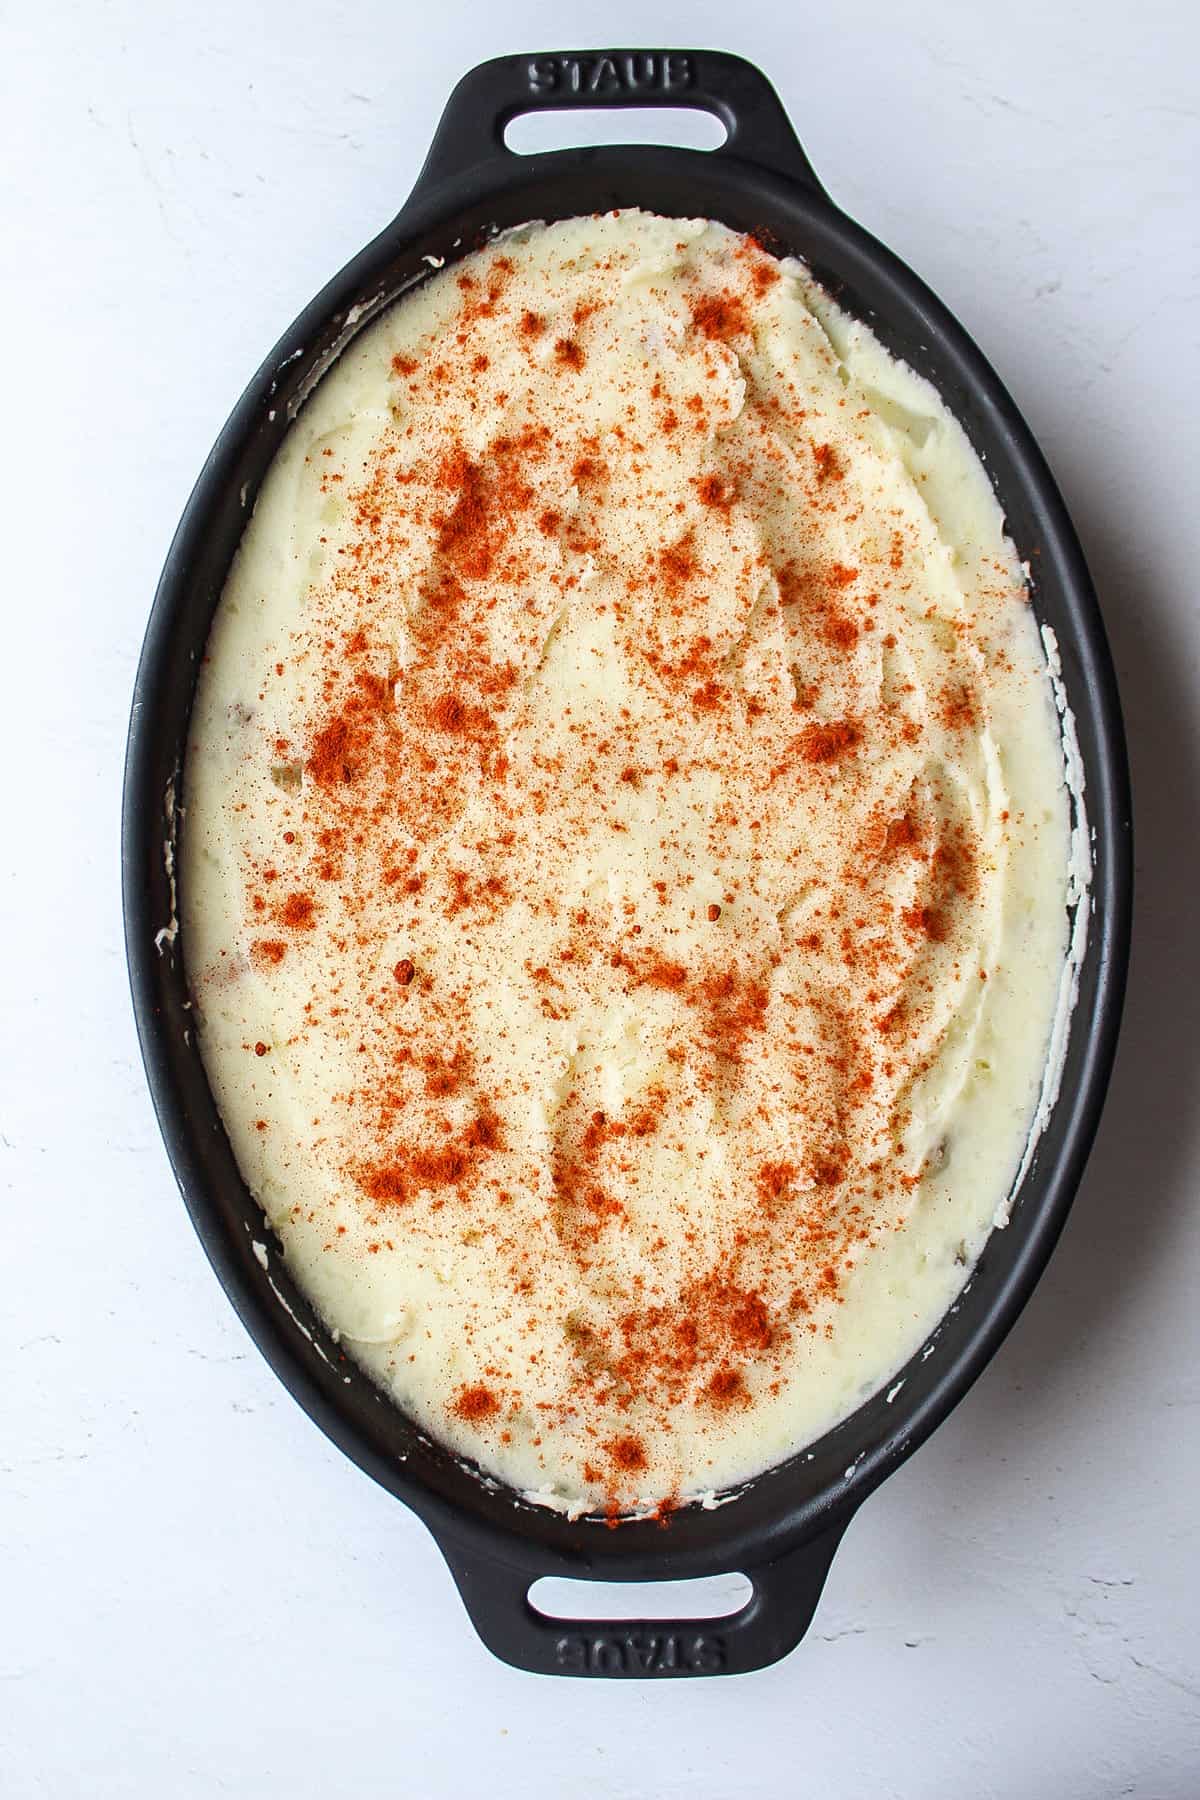 shepherd's pie in a casserole dish with mashed potatoes sprinkled with paprika on top.